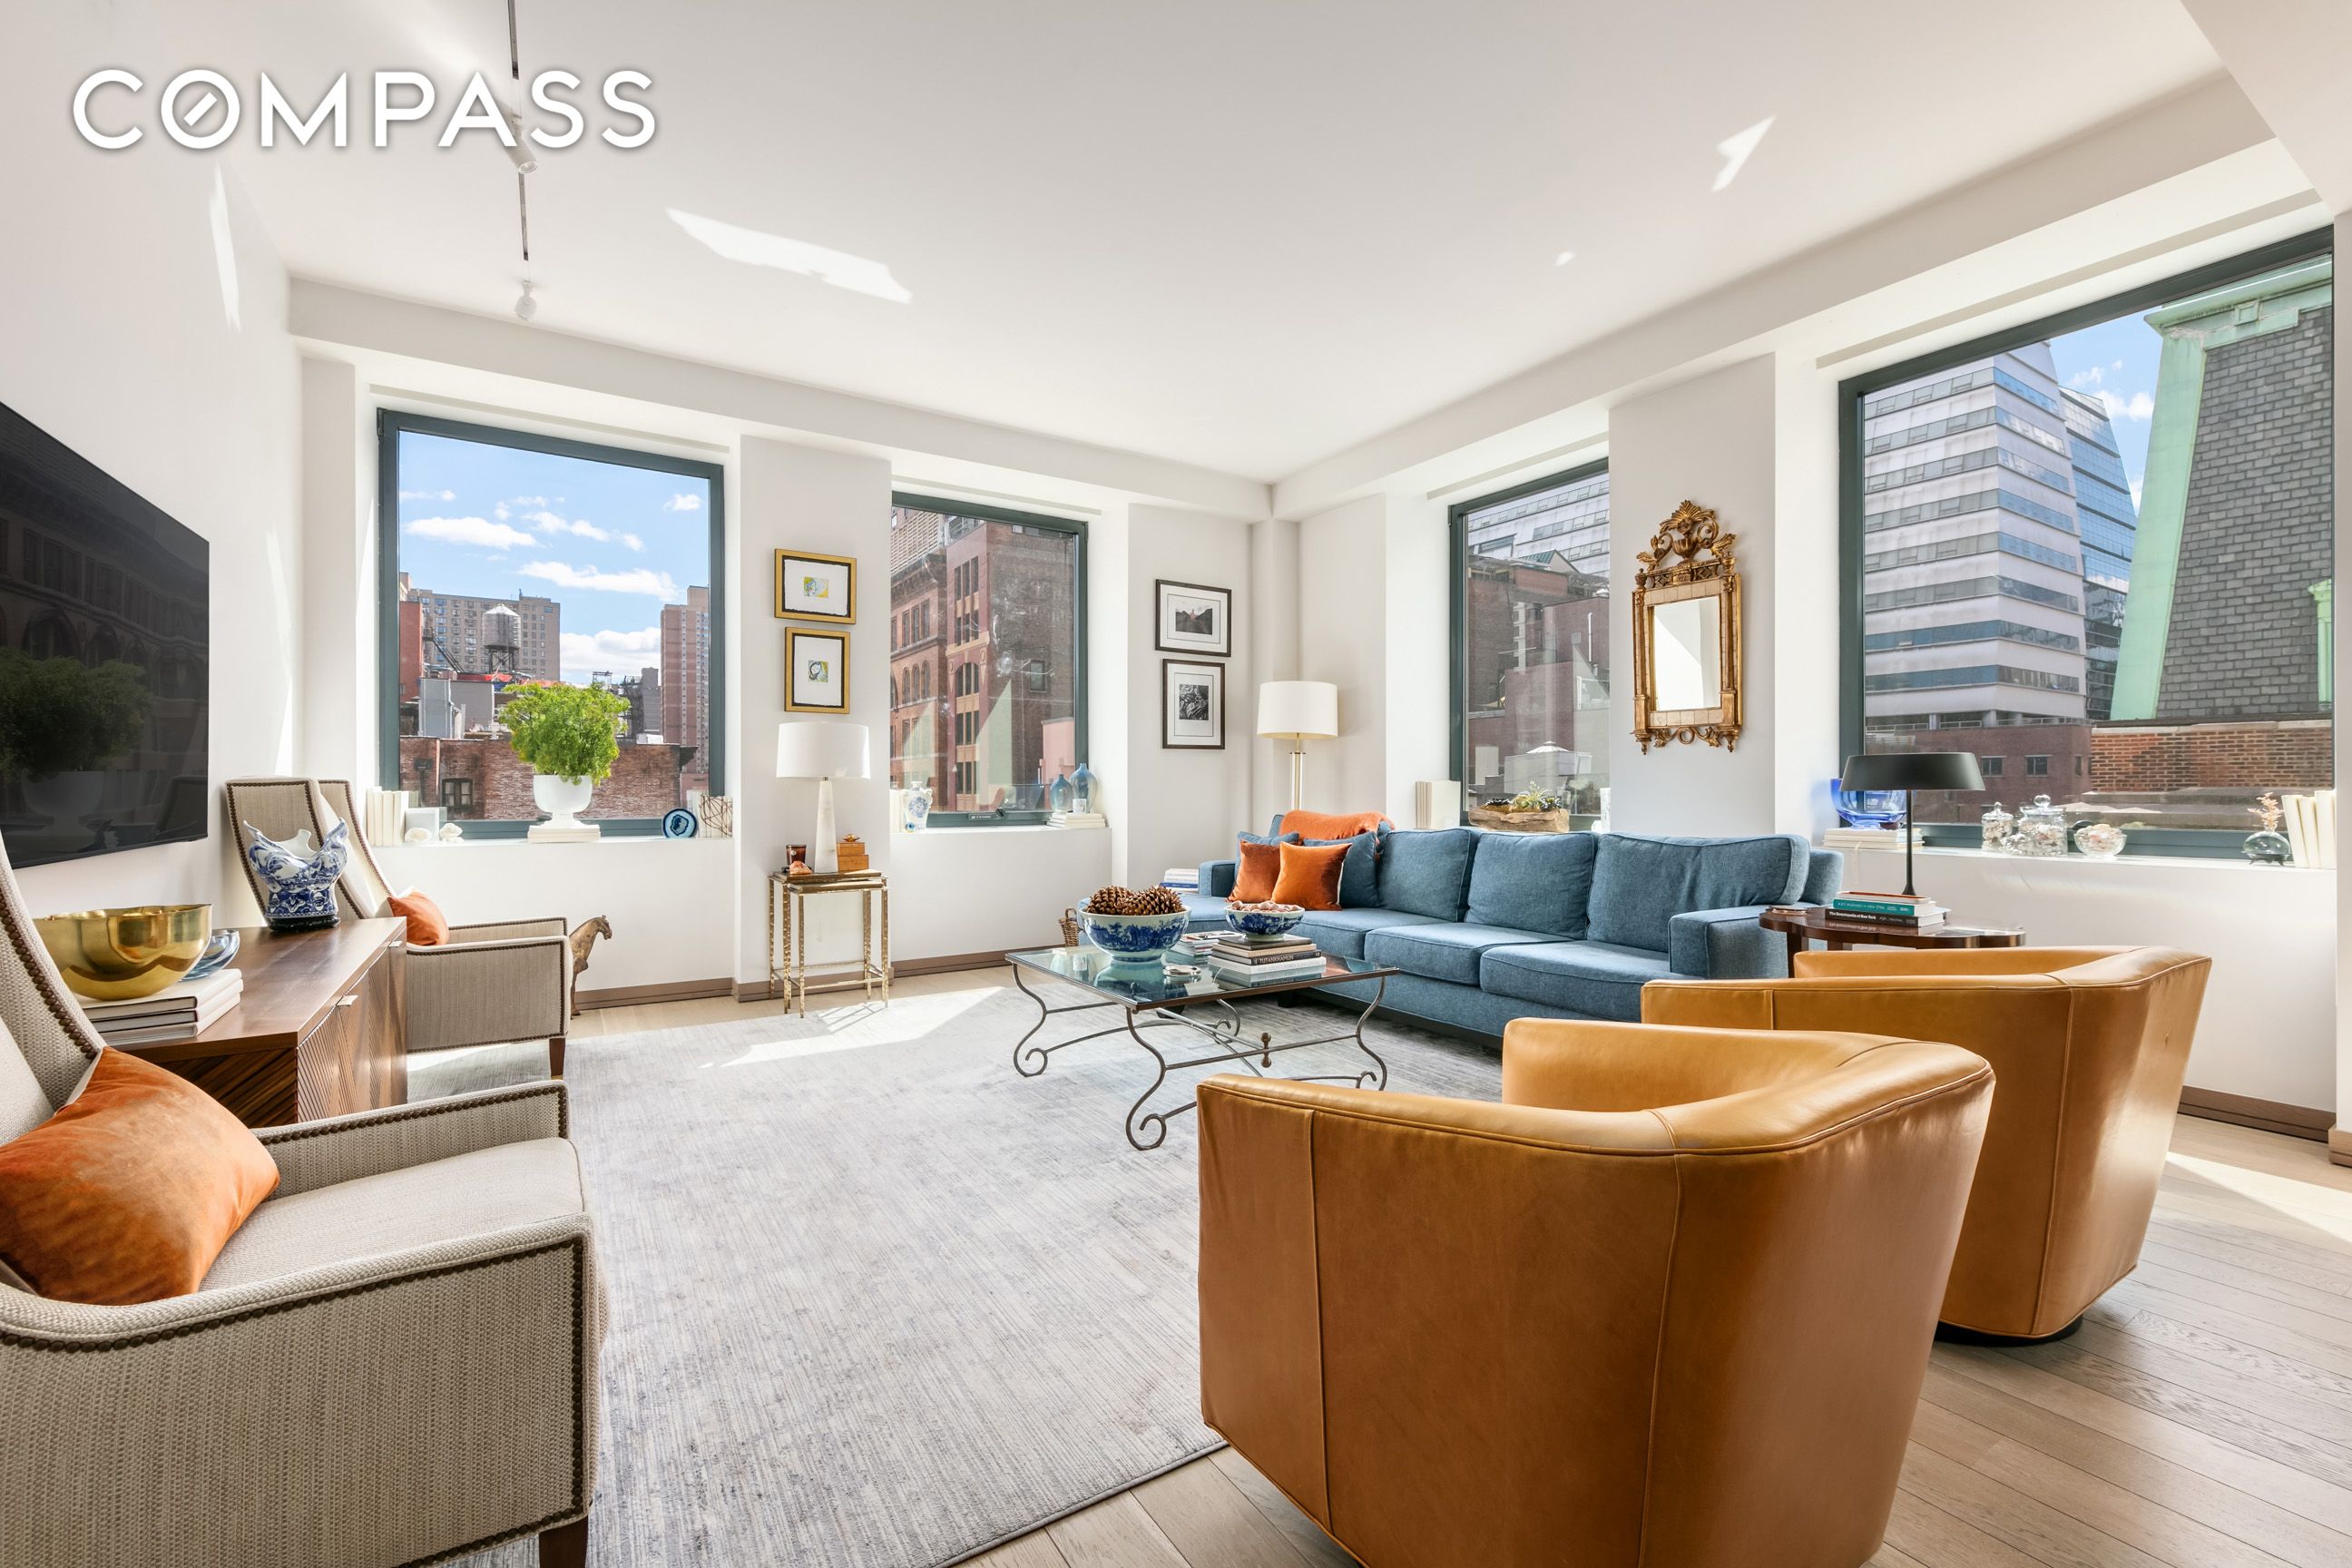 88 Lexington Avenue 605, Nomad, Downtown, NYC - 3 Bedrooms  
2.5 Bathrooms  
5 Rooms - 